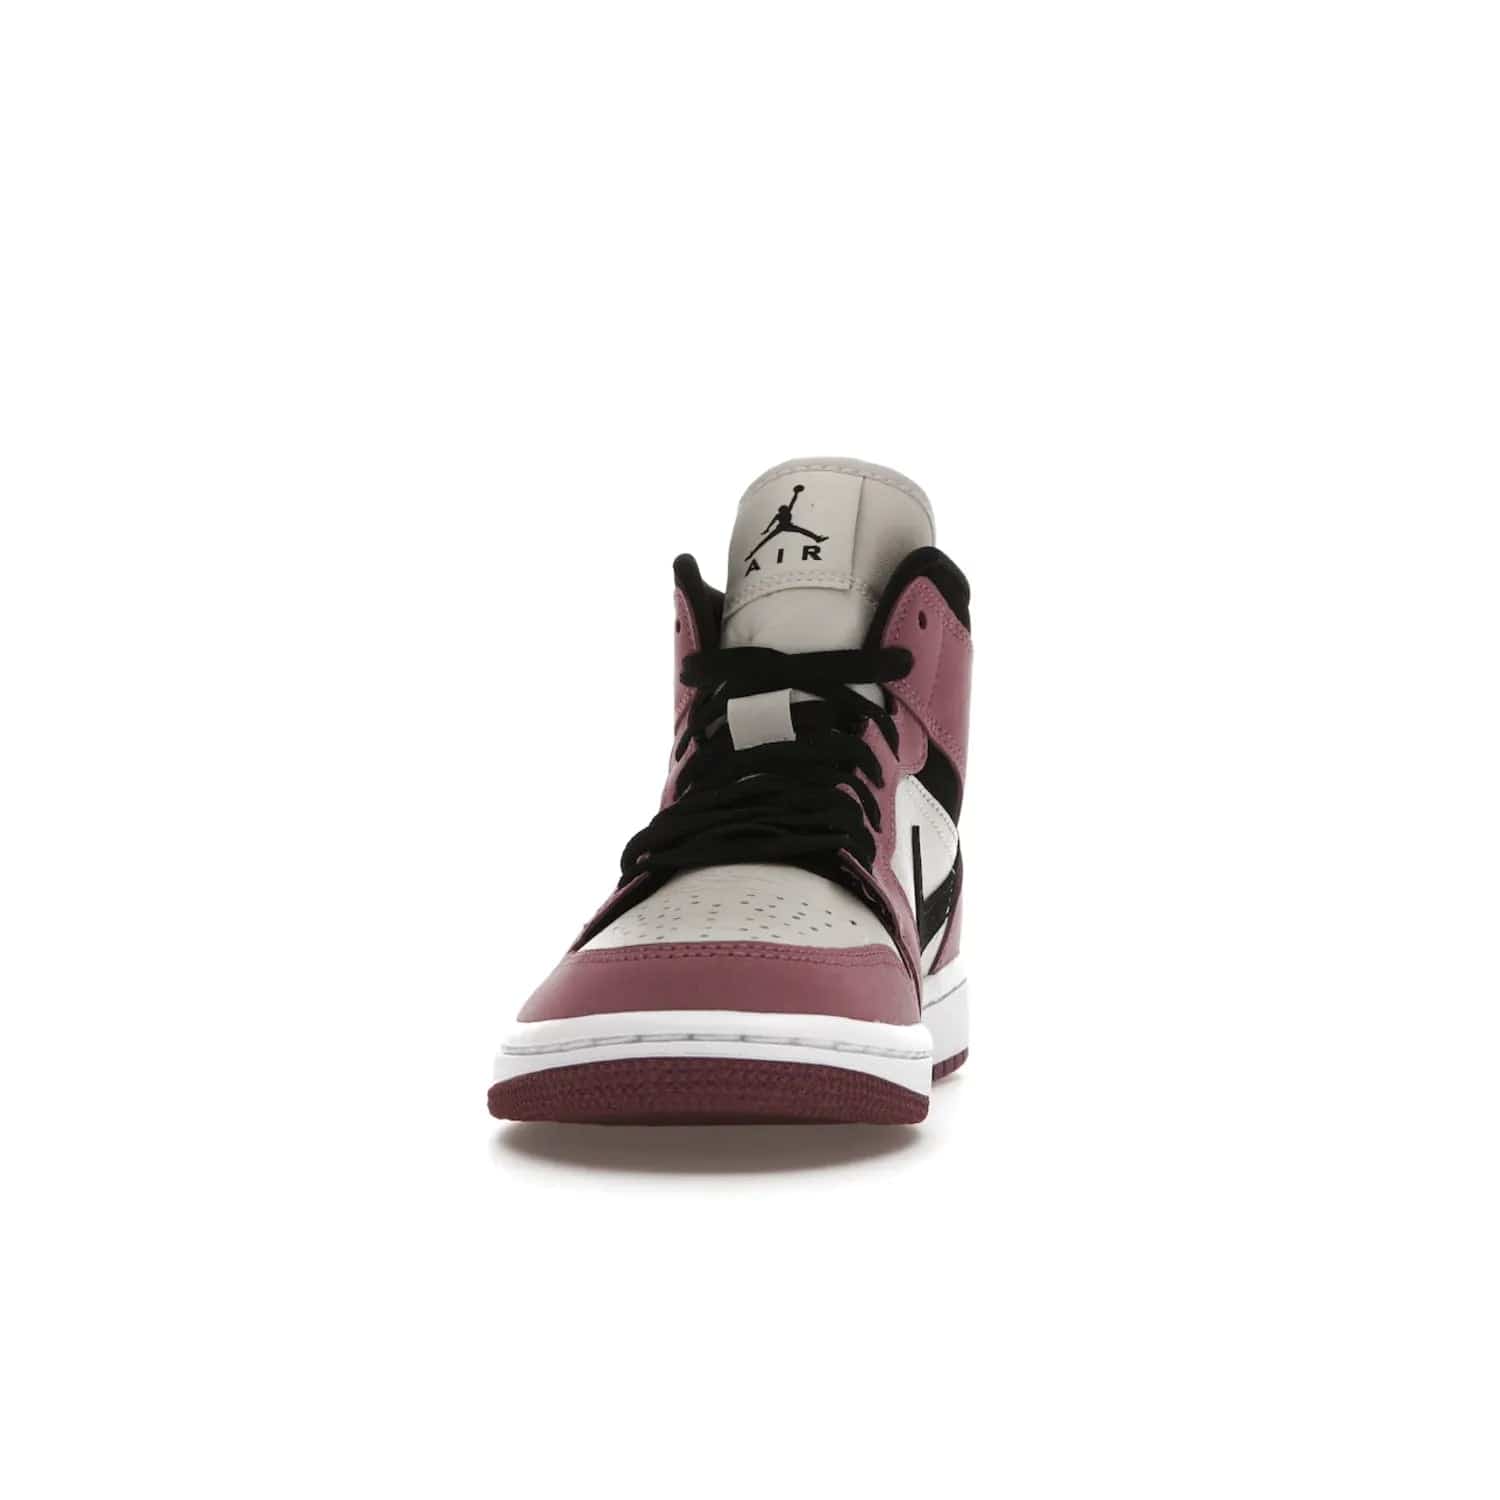 Jordan 1 Mid SE Light Mulberry (Women's) - Image 11 - Only at www.BallersClubKickz.com - Classic style meets performance with the Air Jordan 1 Mid Light Mulberry (Women's). Sleek leather overlays and light bone detailing bring out the best of this classic sneaker, perfect for the active woman on-the-go. Available March 2022.